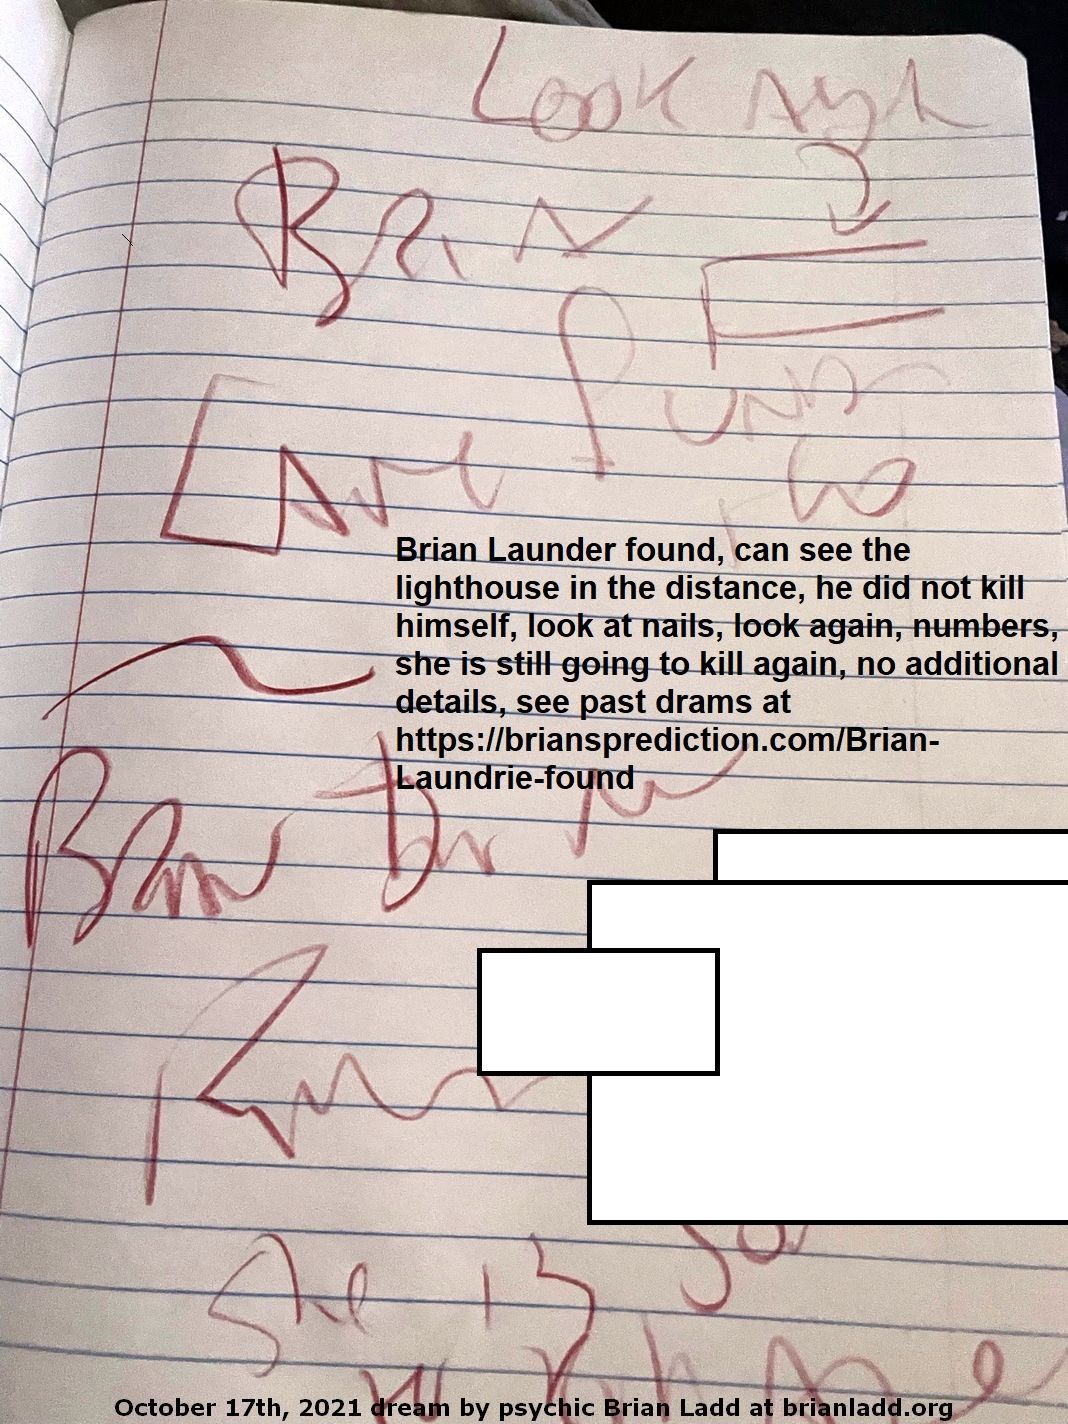 Brian Launder found, can see the lighthouse in the distance, he did not kill himself, look at nails, look again, numbers, she is still going to kill again, no additional details, see past drams at https://briansprediction.com/Brian-Laundrie-found
Brian Launder found, can see the lighthouse in the distance, he did not kill himself, look at nails, look again, numbers, she is still going to kill again, no additional details, see past drams at https://briansprediction.com/Brian-Laundrie-found
